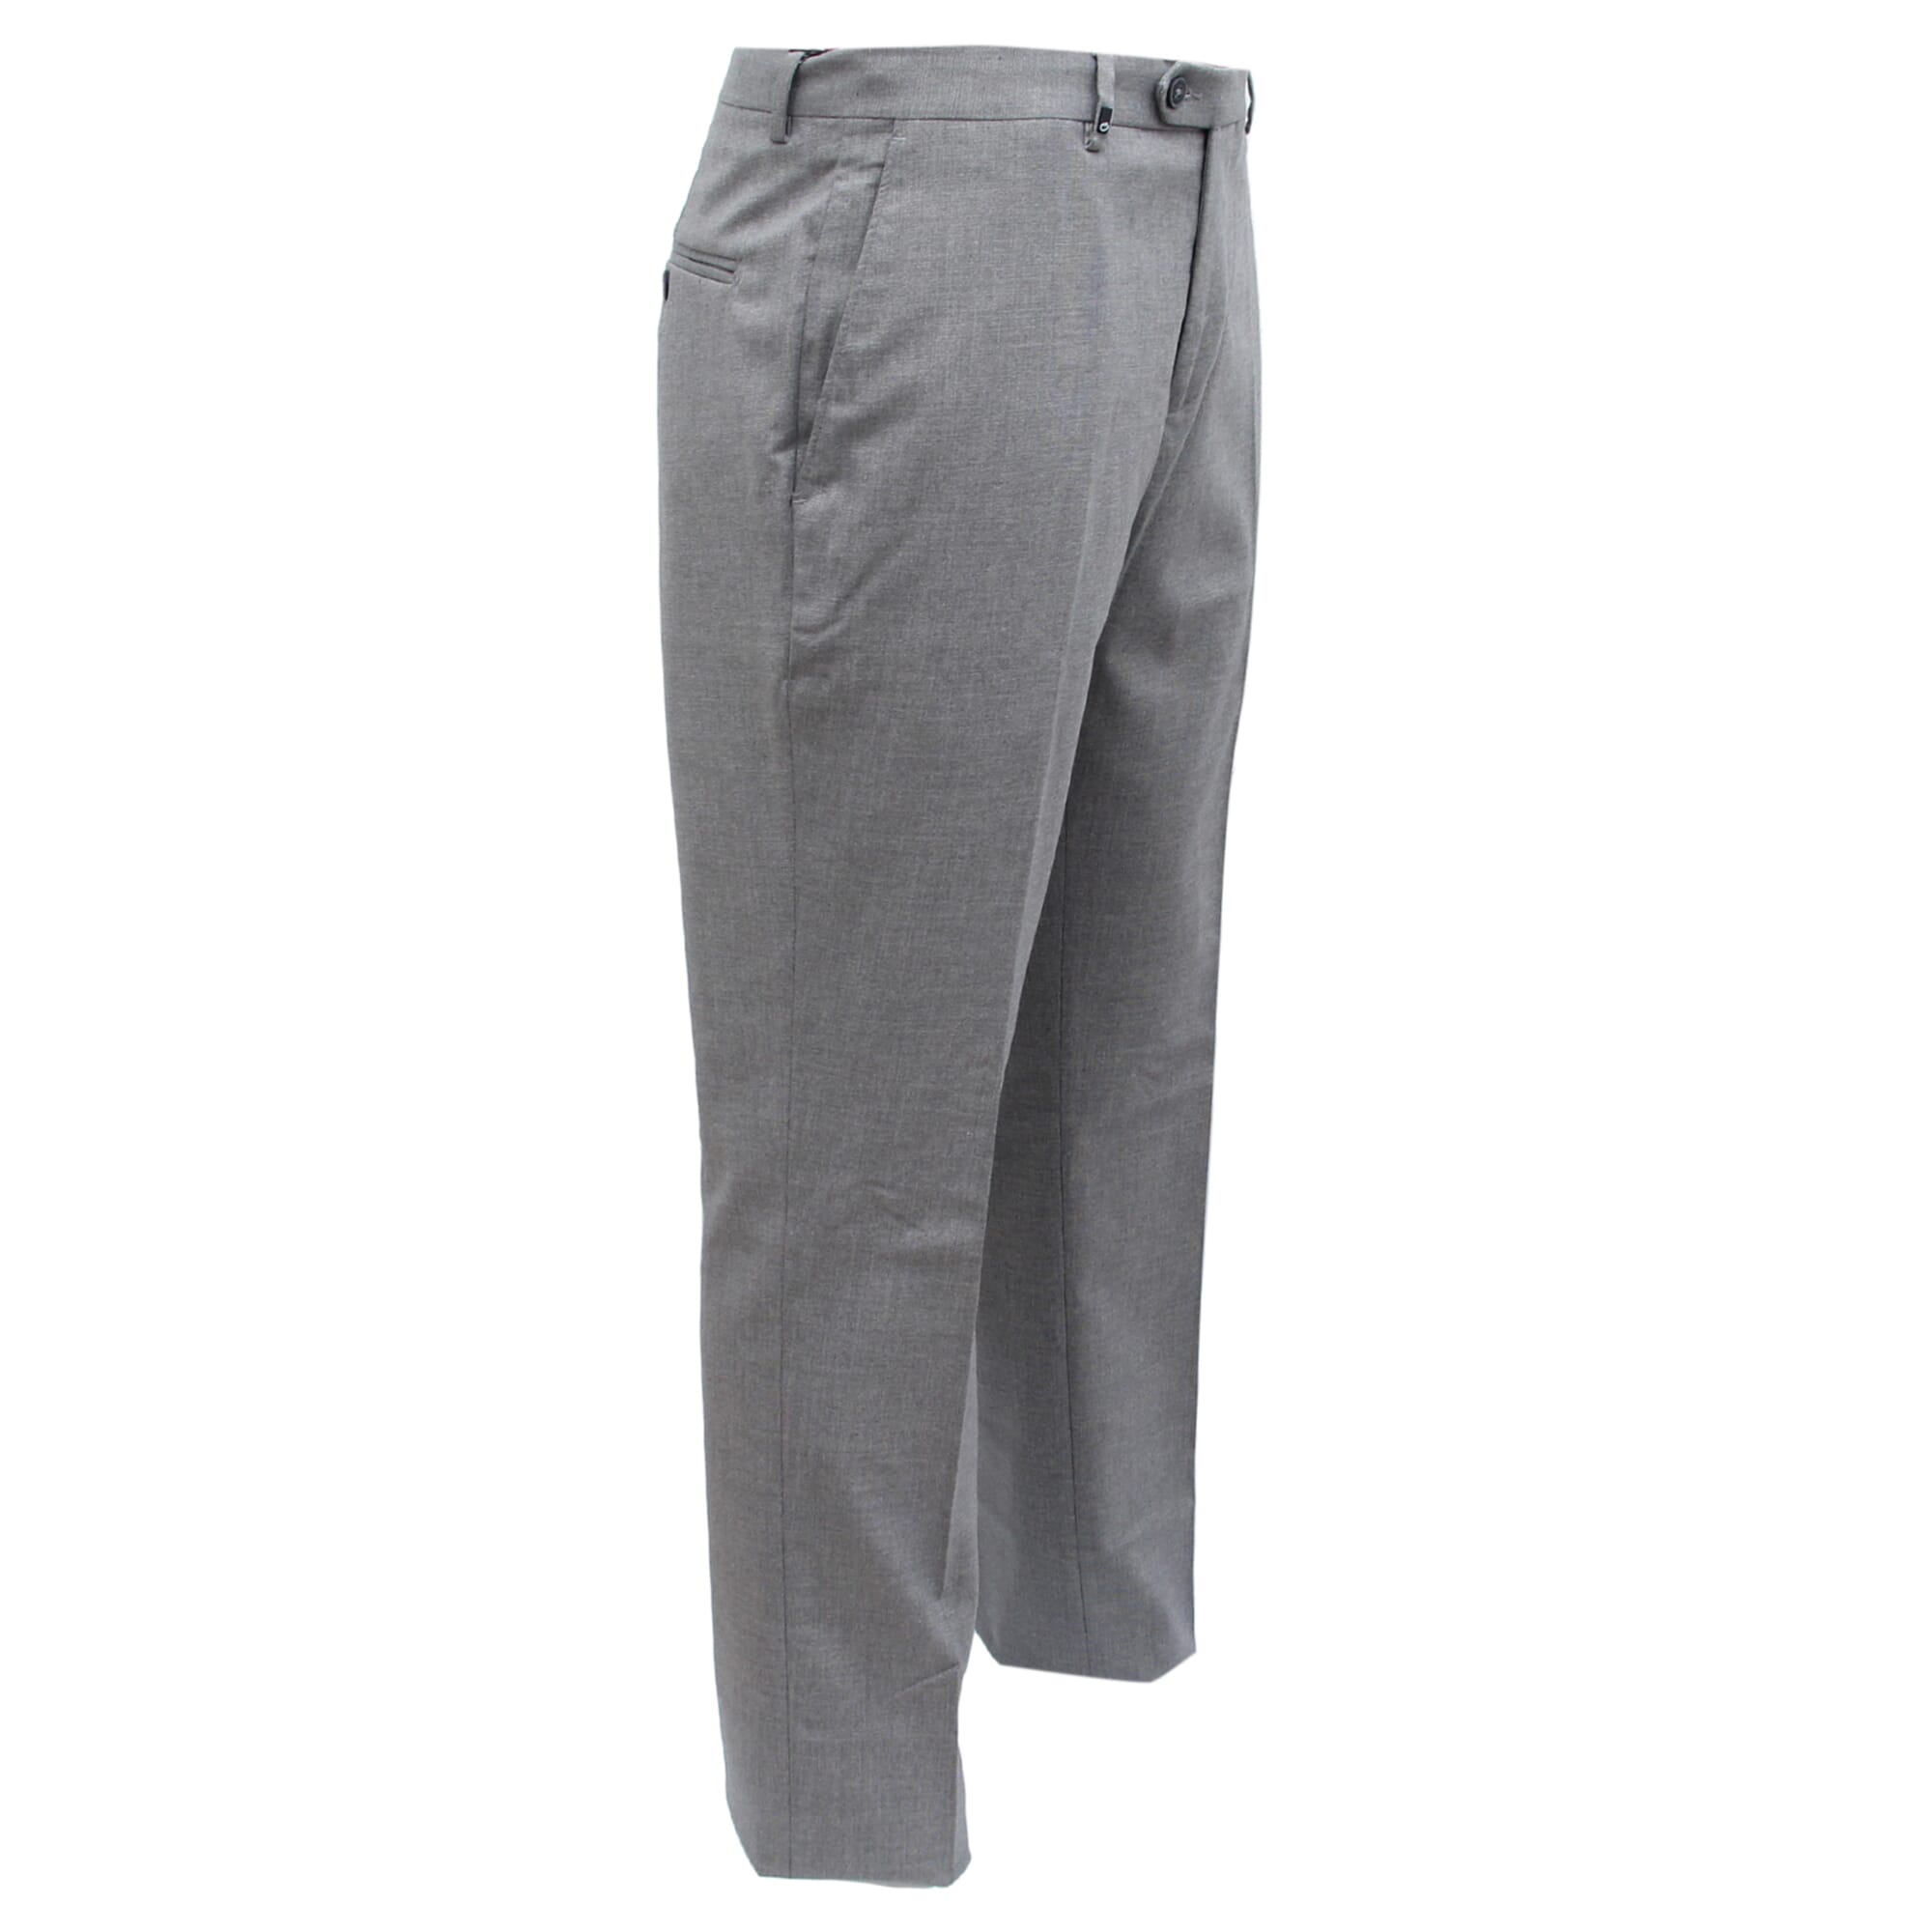 Cats Eye - Distinct with refined grey color, these modern pants are made  with comfortable fabrics for an effortless feel and fit. 👉To purchase this formal  pant online please check the link